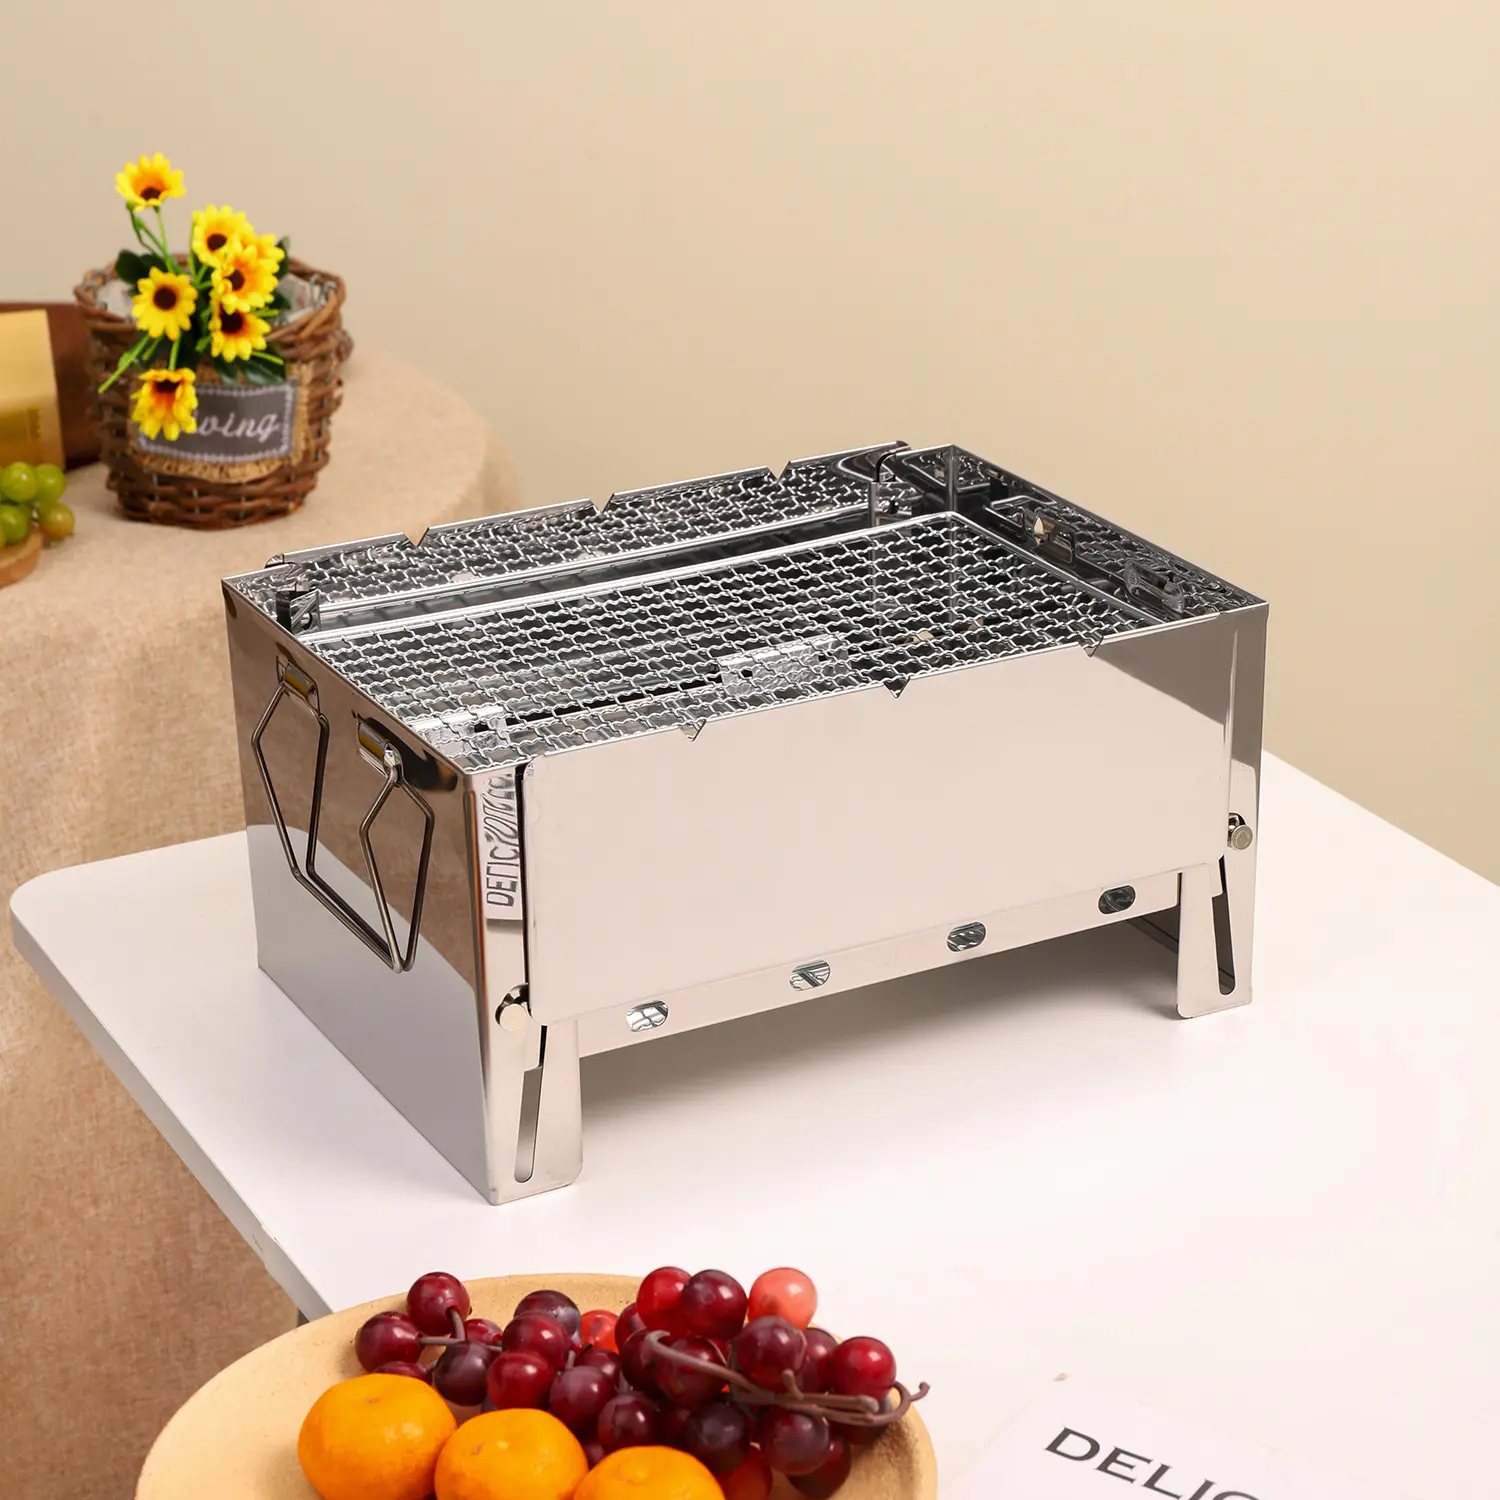 Factory Sale Faltbarer BBQ Gril Picknick koffer Kleine tragbare Outdoor Box Charcoal Camp Barbecue Griller Charcoal Grill